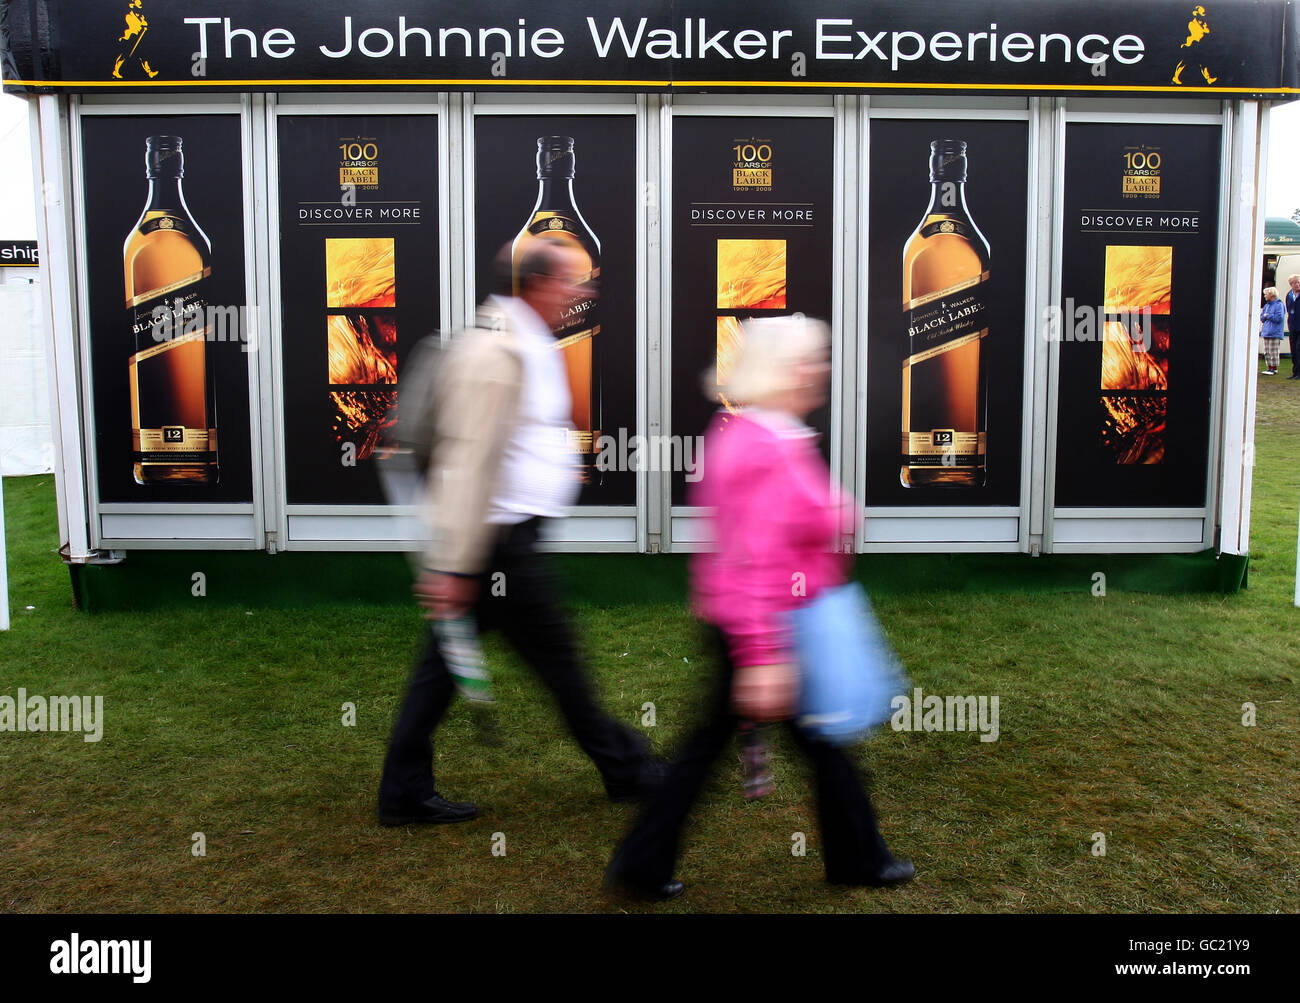 Golf fans at the whisky experience at the Johnnie Walker Golf Championships at Gleneagles after Diageo, owners of Johnnie Walker, which announced pre-tax profits of more than 2bn, a fall of 3.7% on the previous year. Stock Photo